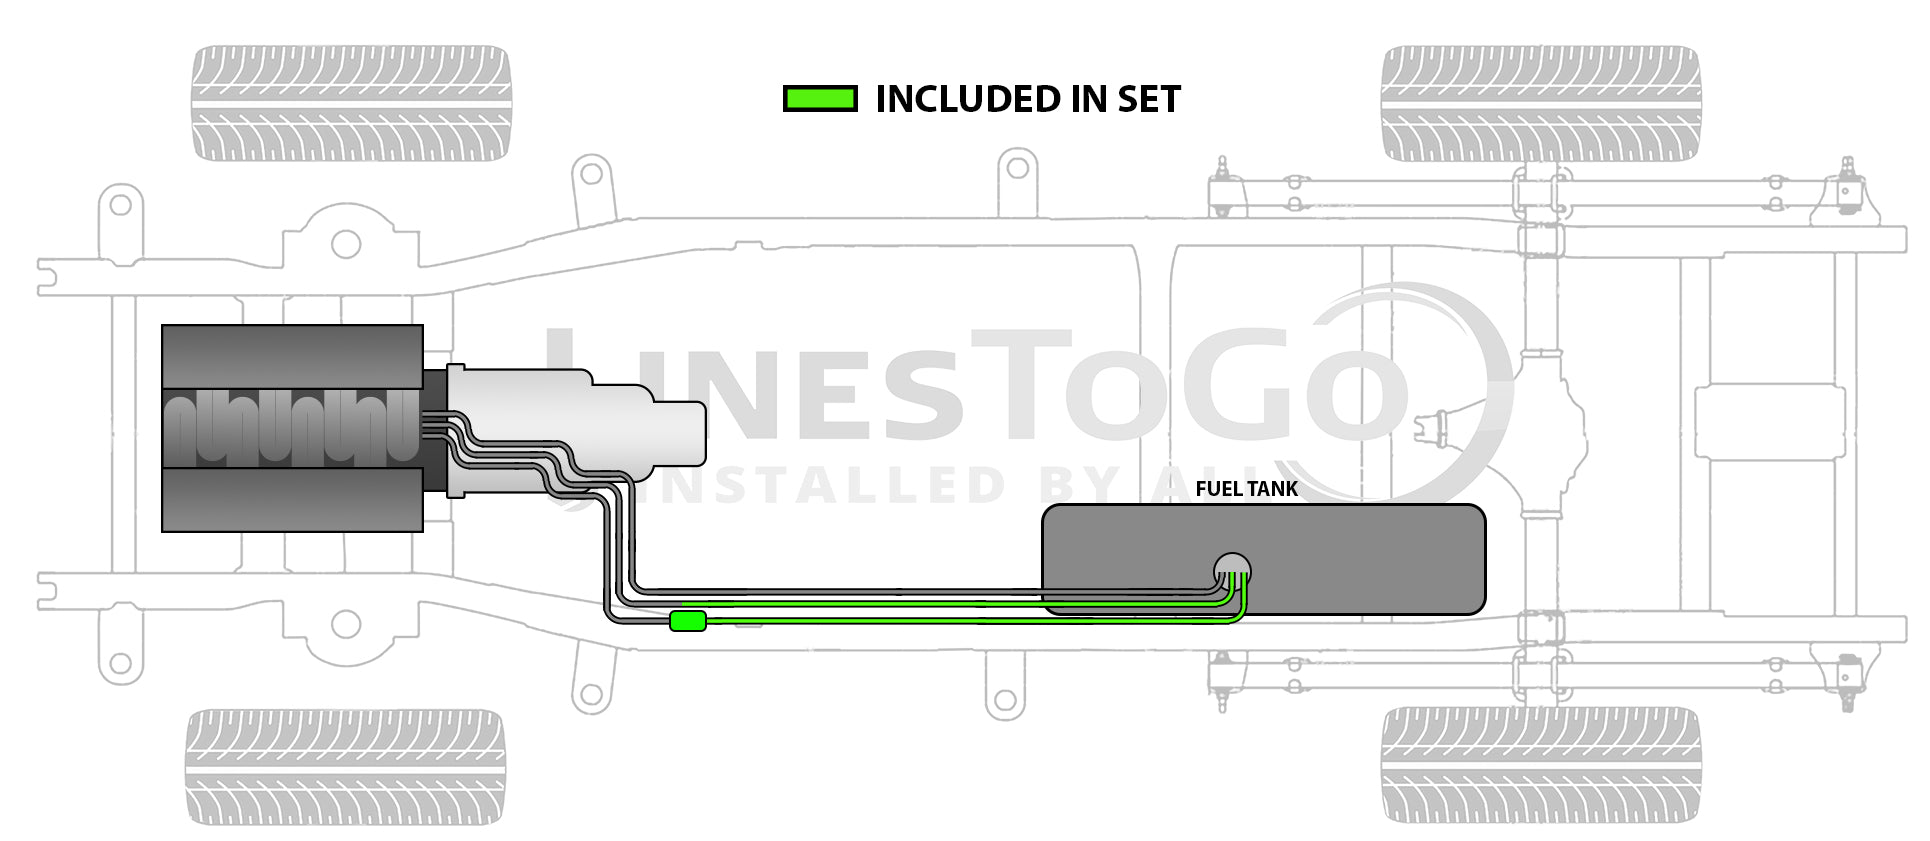 Chevy Truck Rear Fuel Line Set 1991 C Series Reg Cab 6.5 ft Bed 2WD 5.0L Gas SS400-B1J Stainless Steel